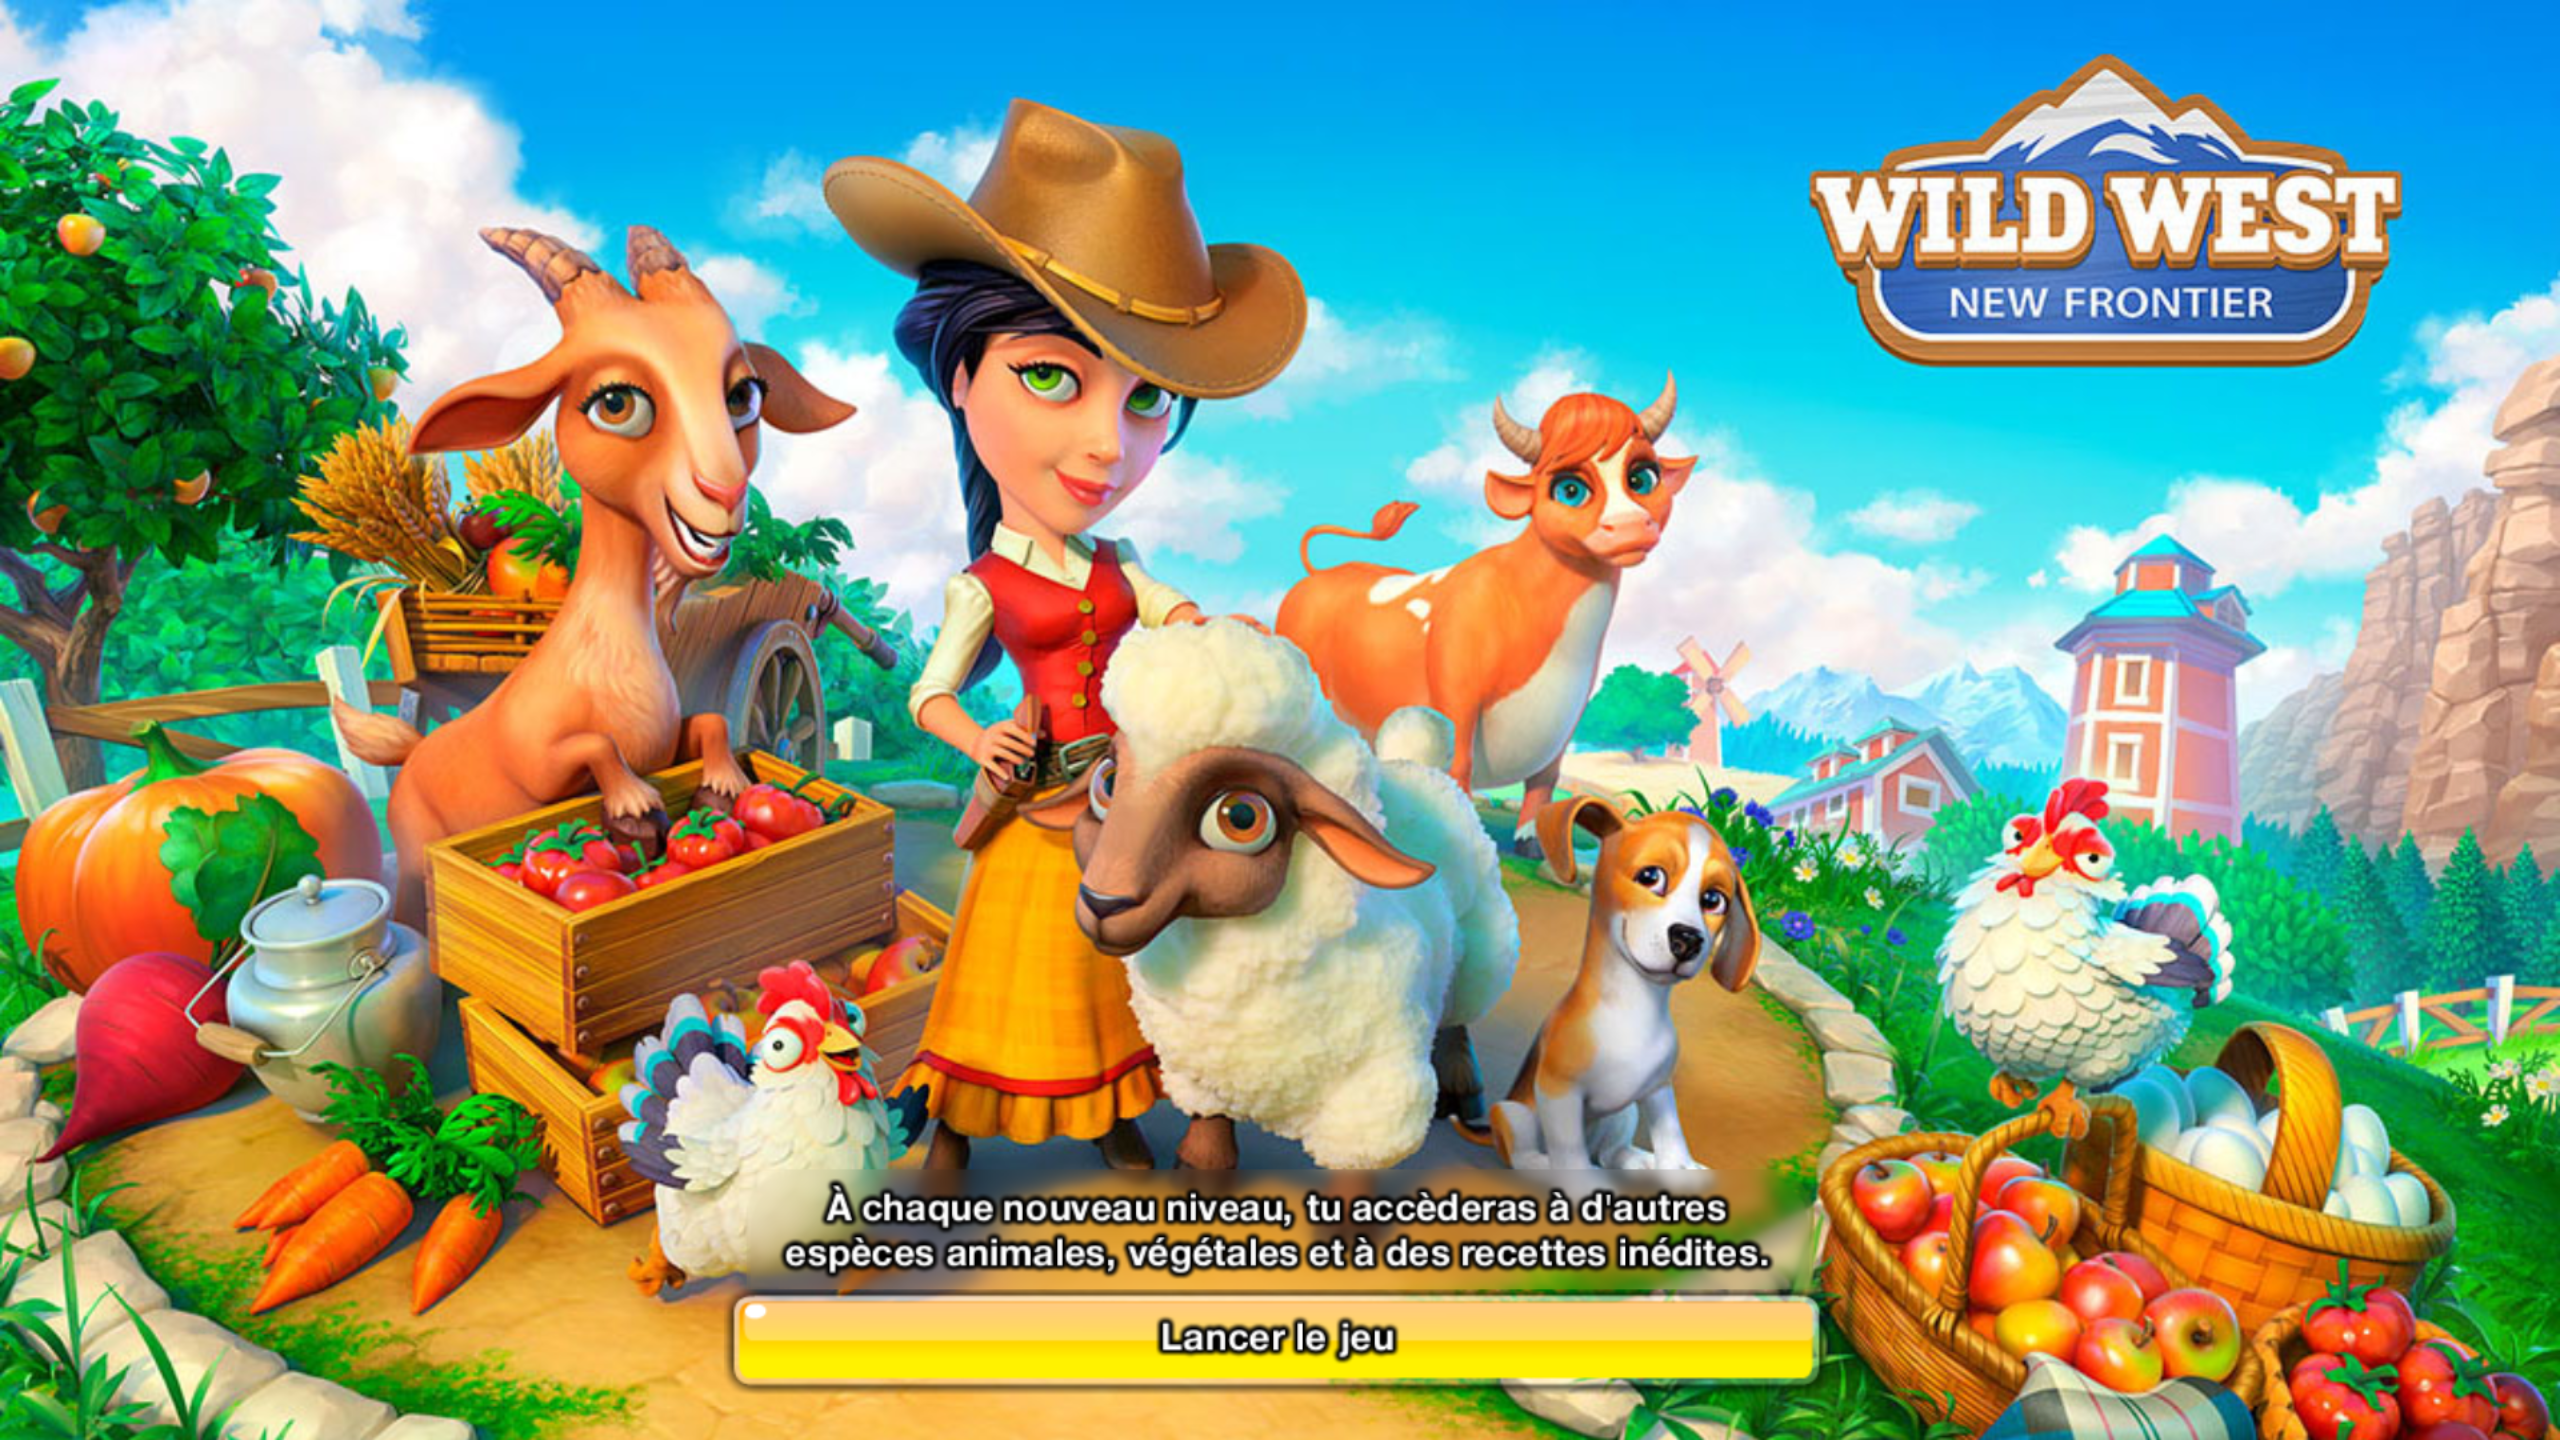 How to do the stagecoach in the game wild west new frontier - resourcedads